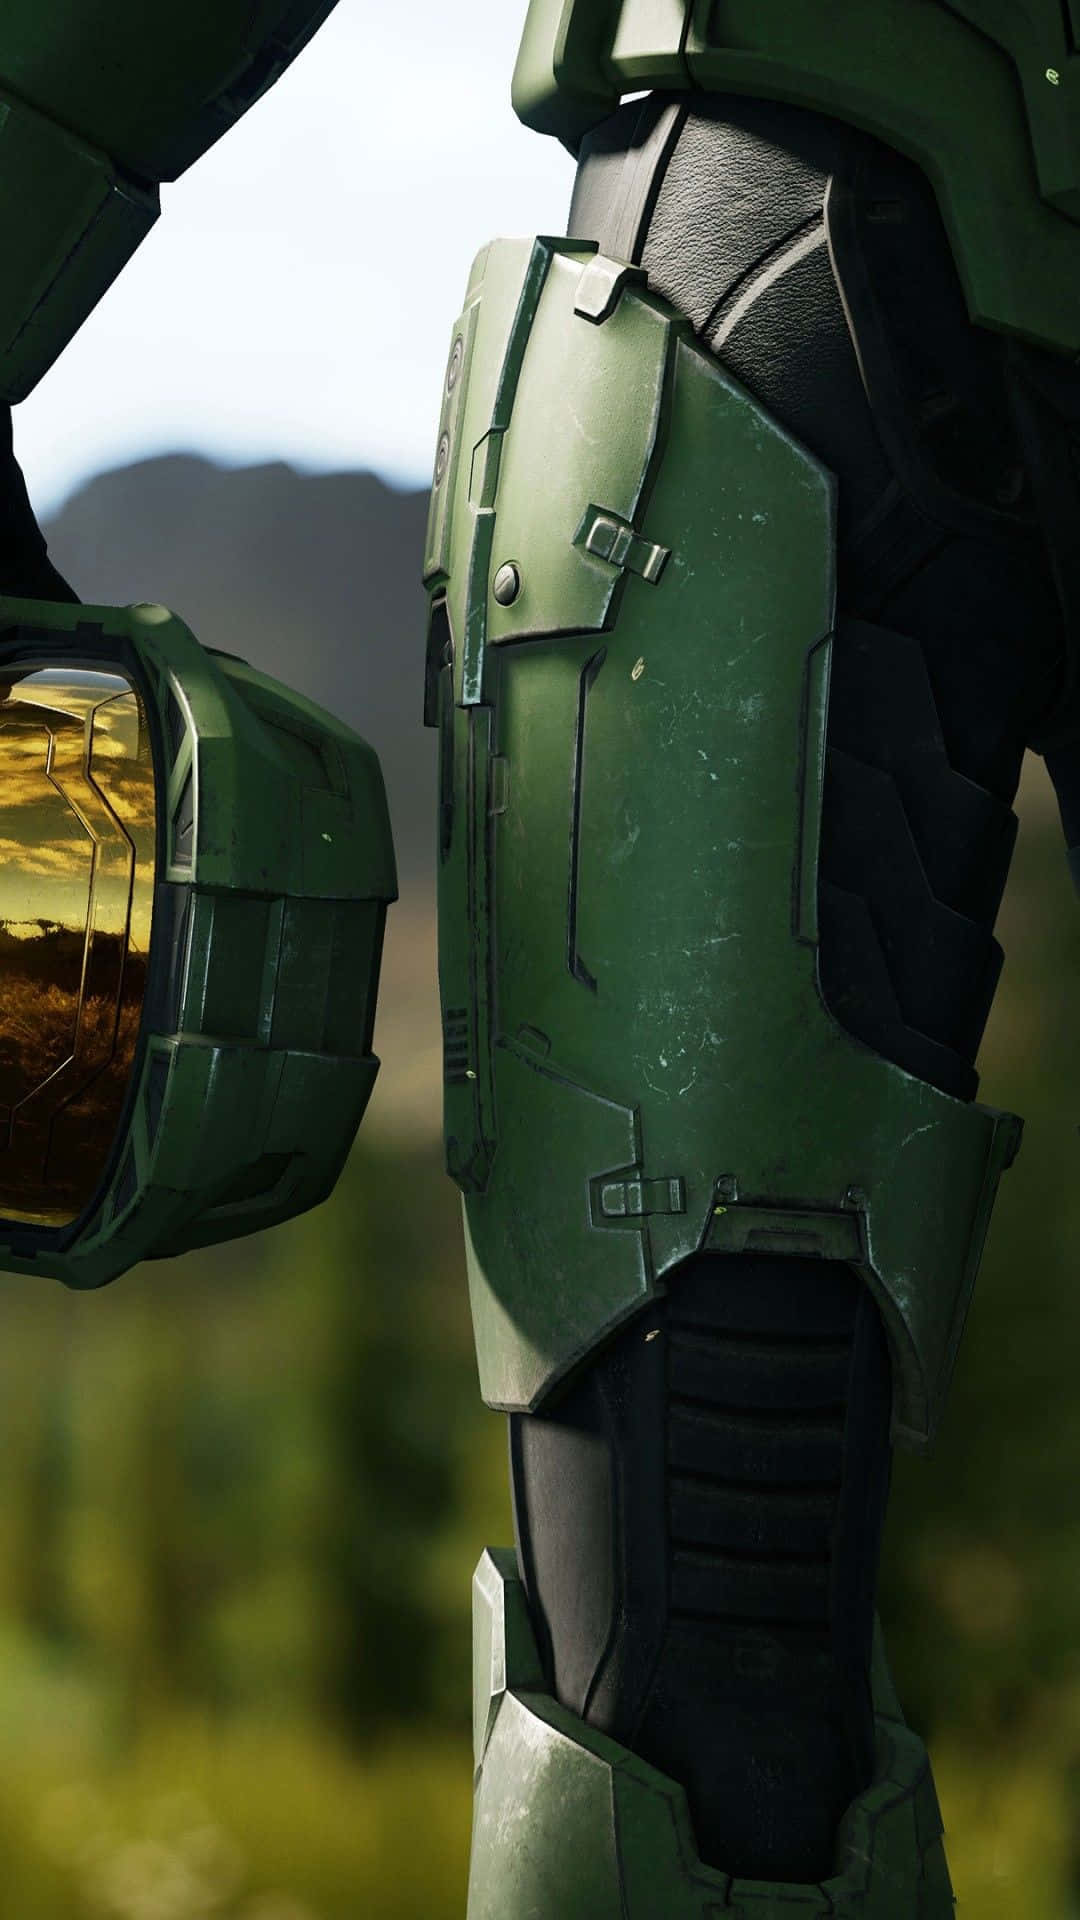 Action-packed Halo Infinite gameplay featuring Master Chief and a warthog.